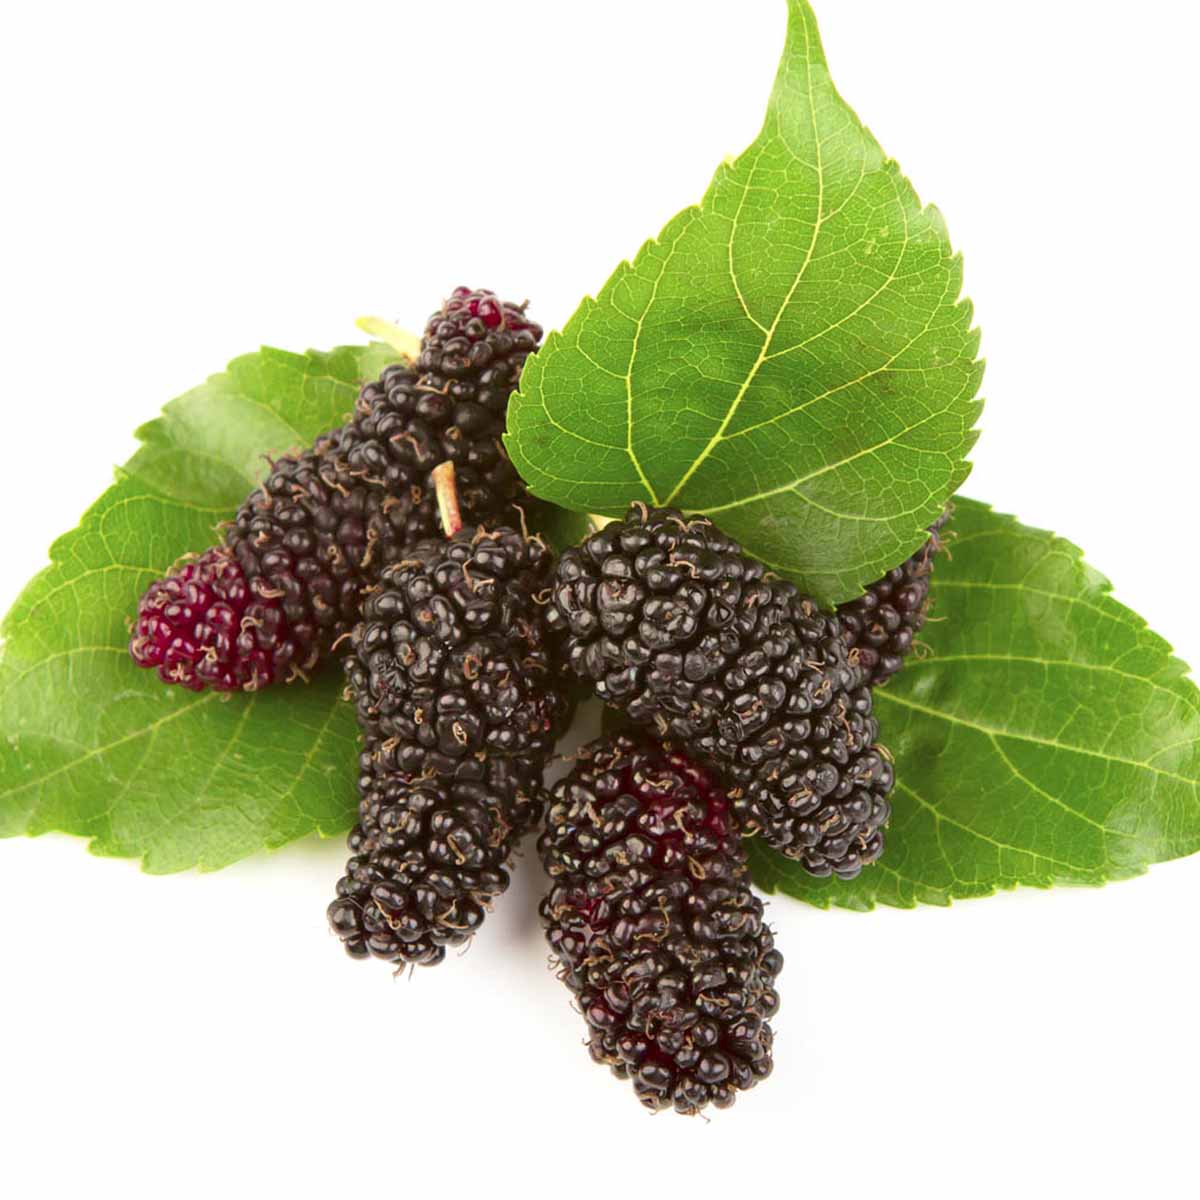 ripe mulberries arranged on mulberry tree leaves.